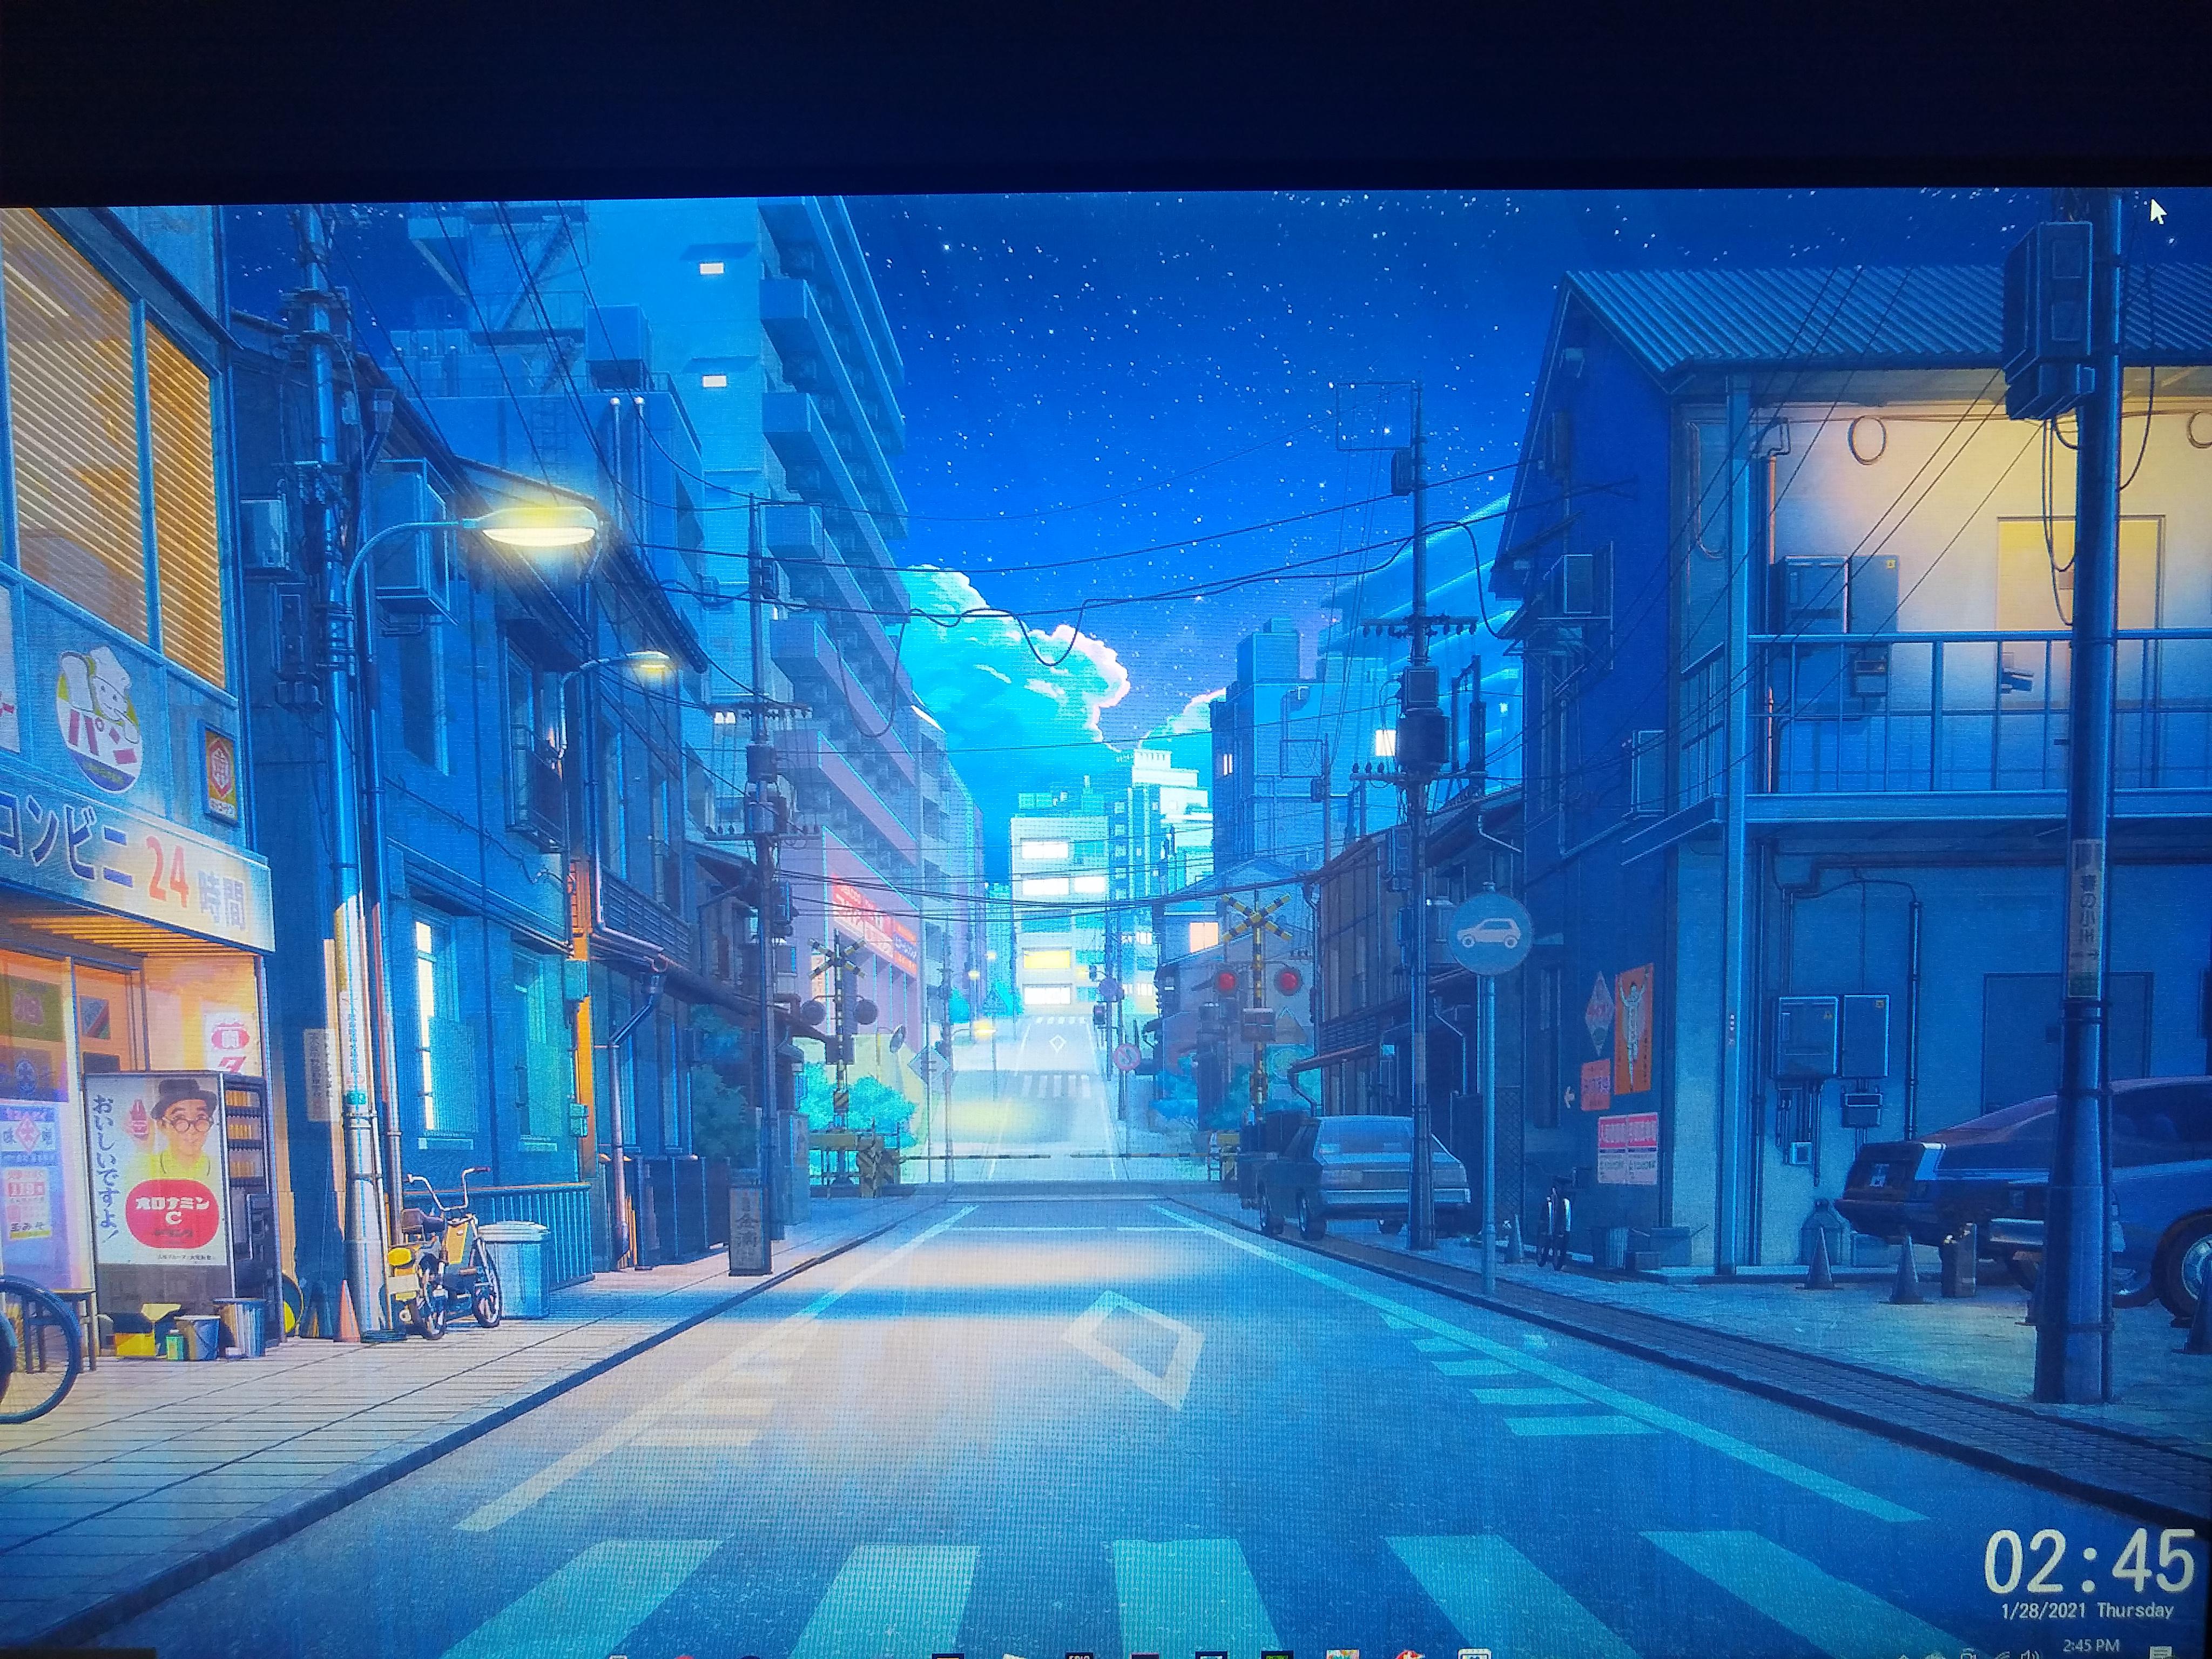 Anyone know any similar wallpaper that have animations? (Also would like to keep the Japanese look and clock)